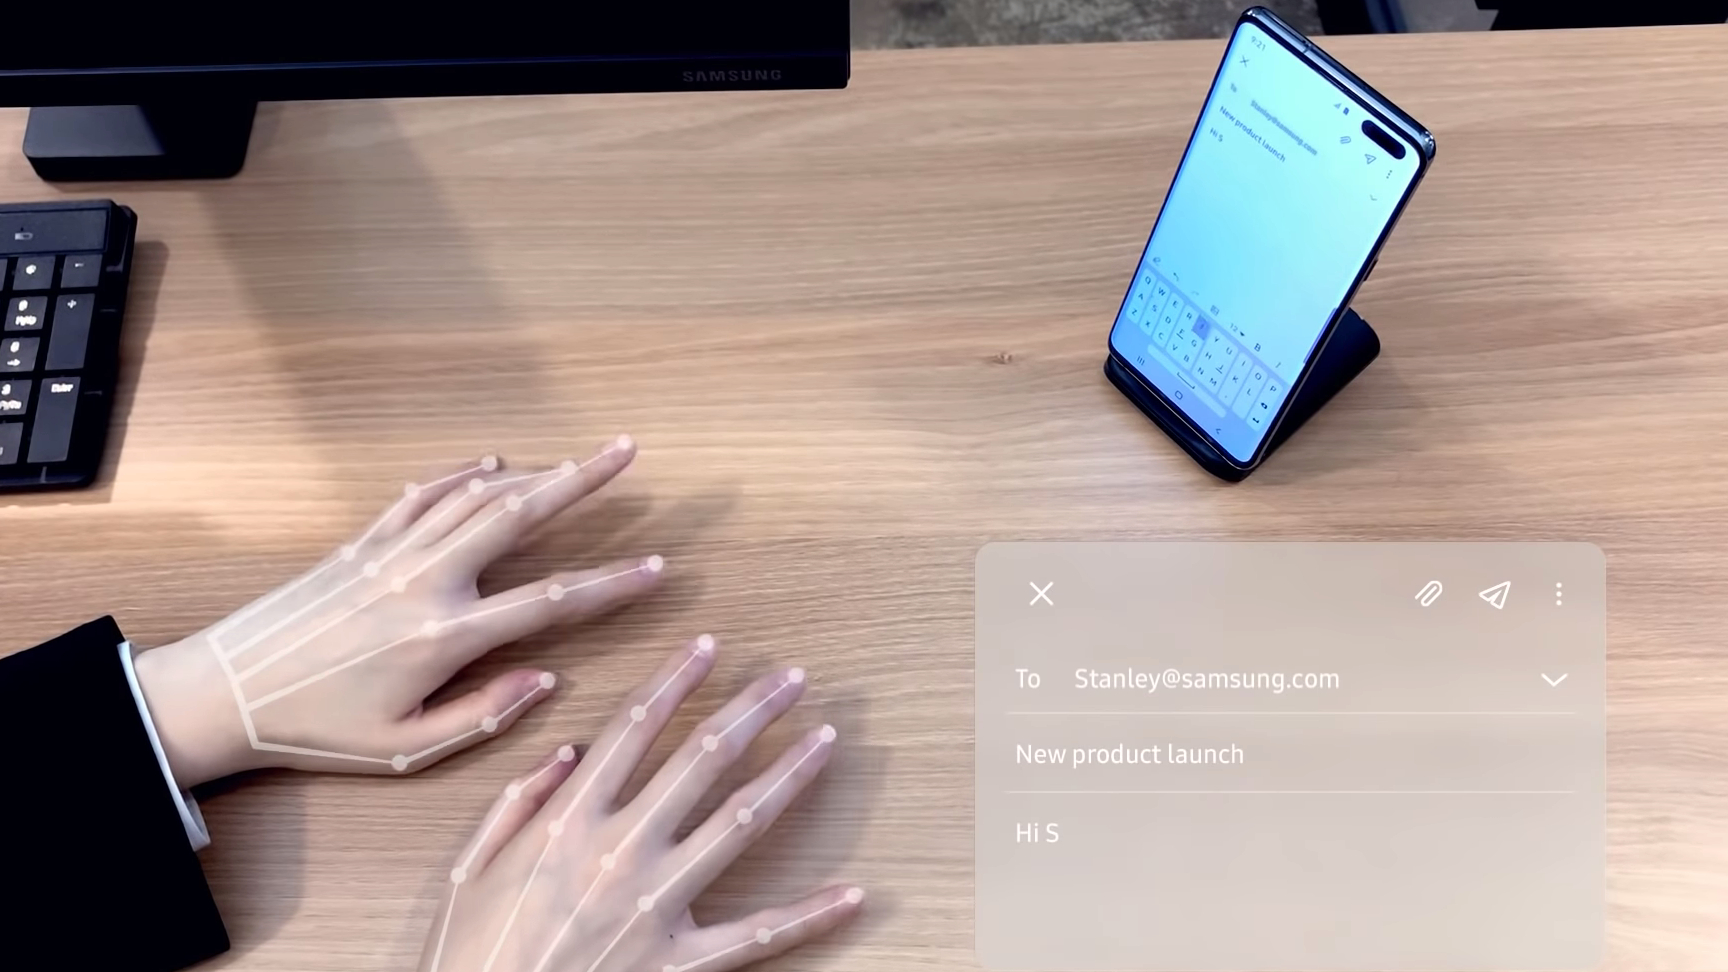 Samsung’s_crazy_invisible_keyboard_tech_work.